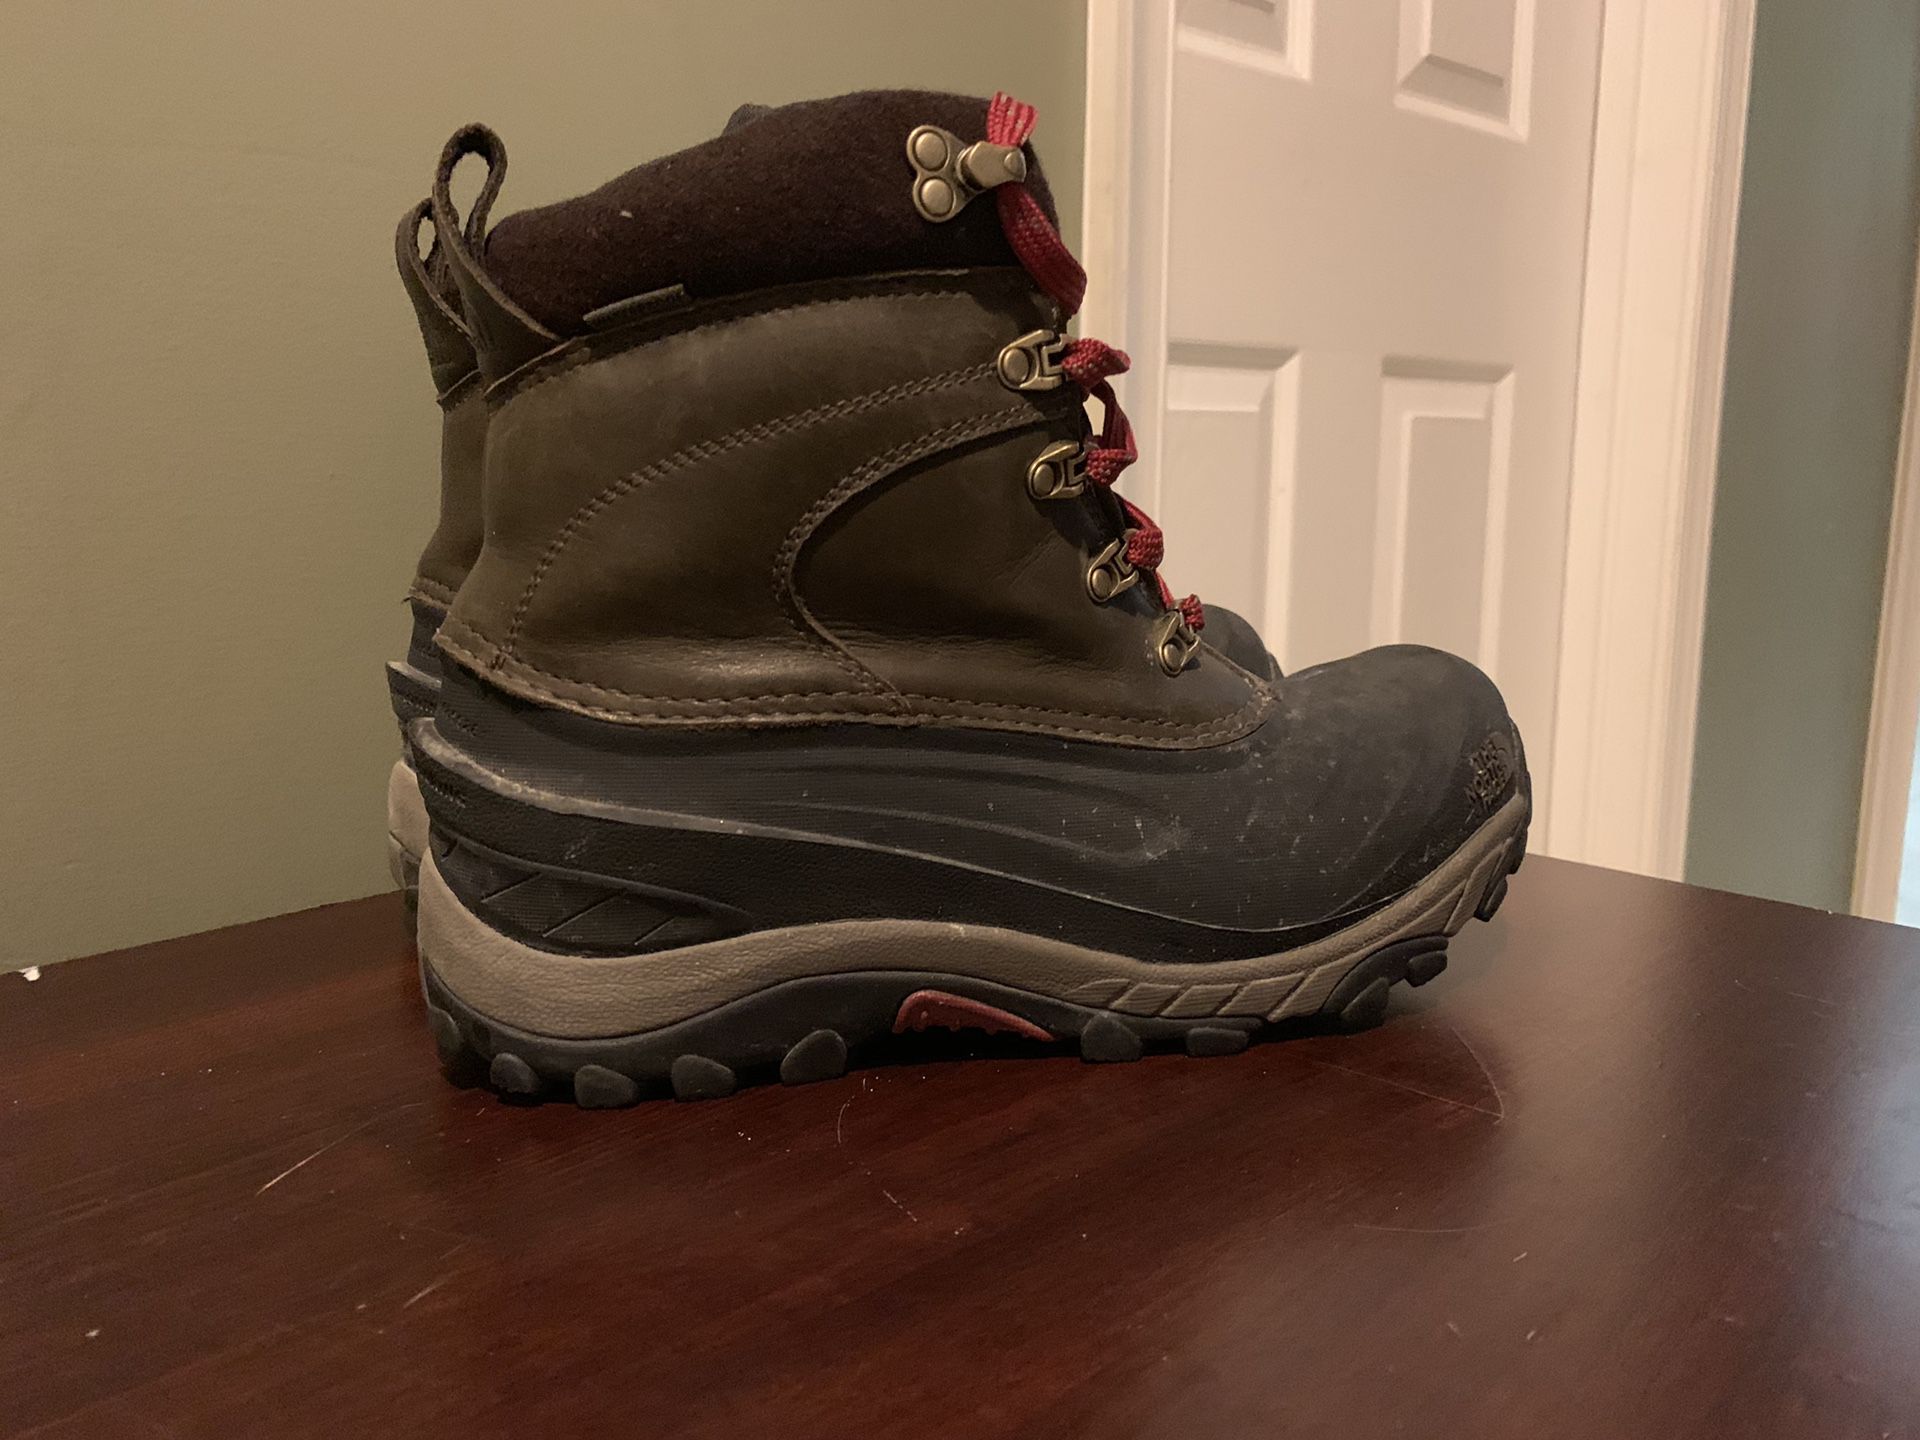 North Face Men’s boots size 8.5